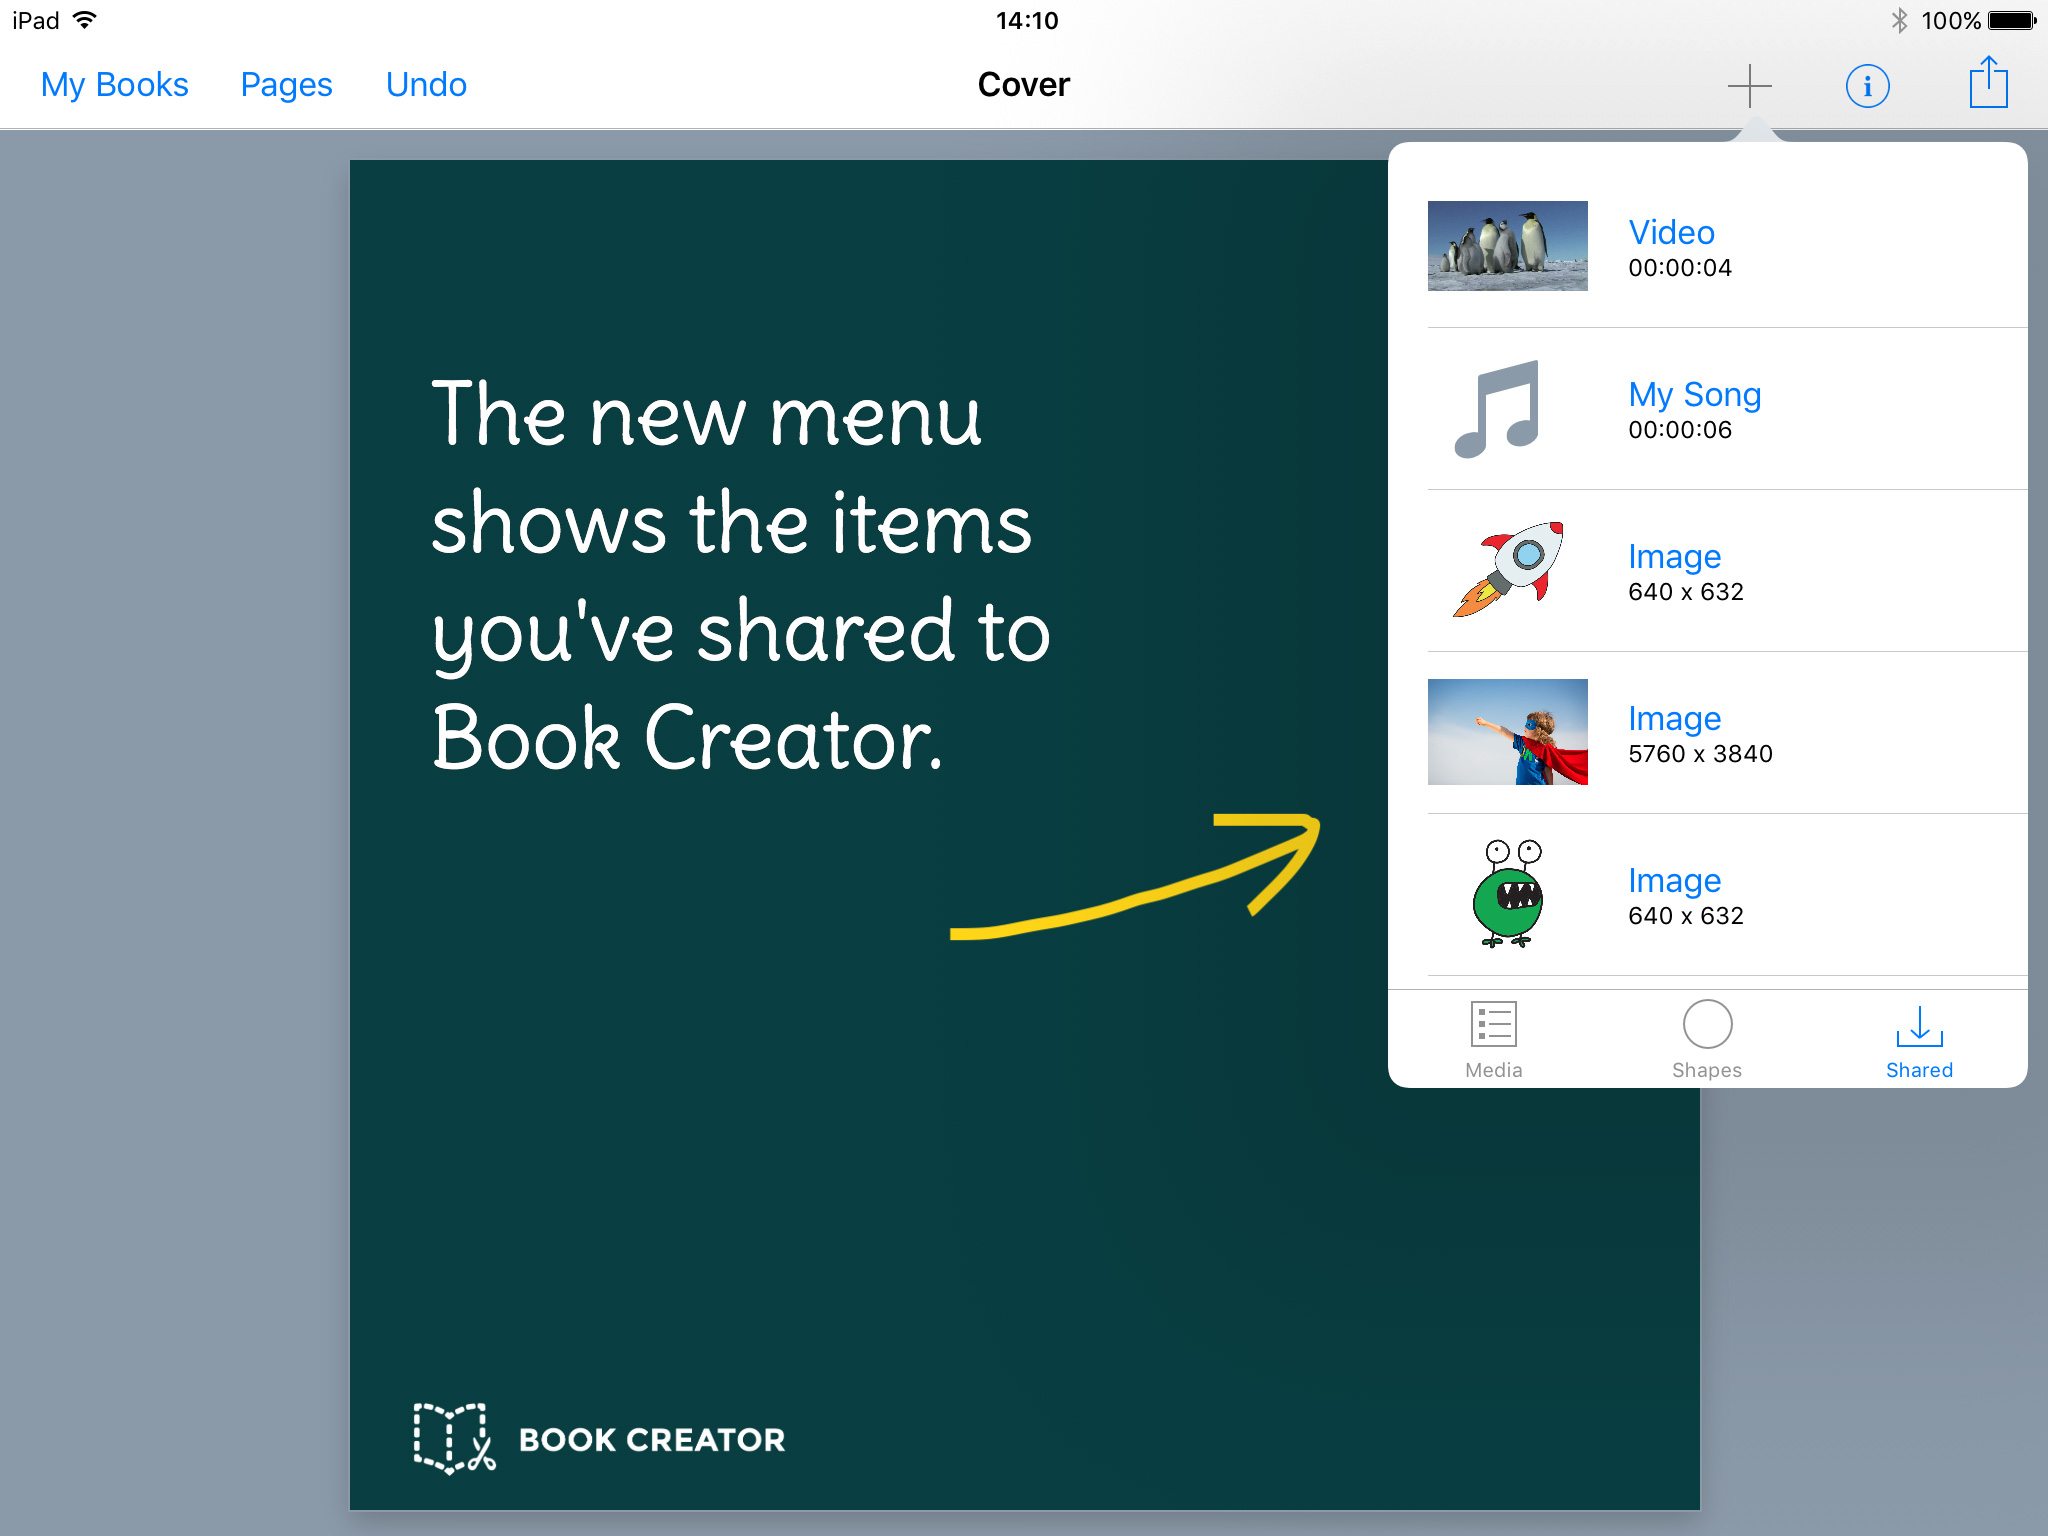 New menu shows items you've shared to Book Creator